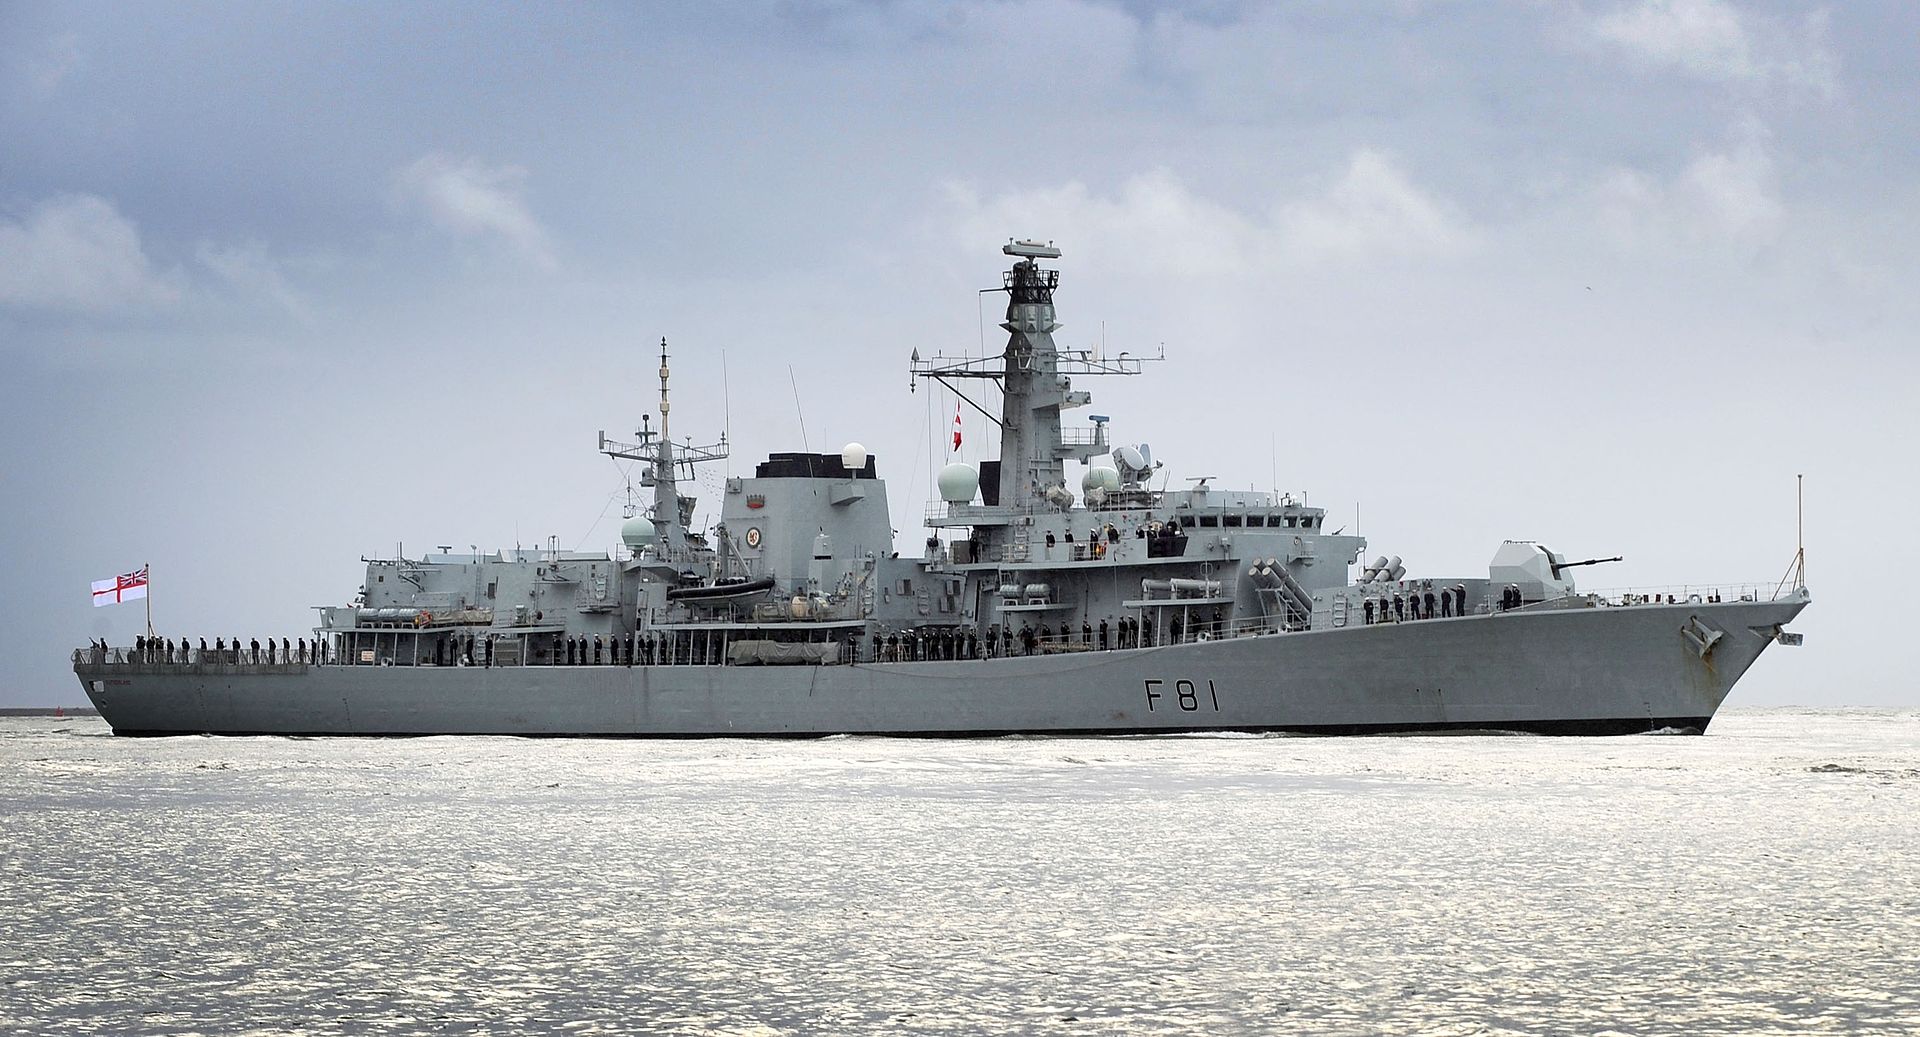 HMS Sutherland, a UK Royal Navy frigate, is seen sailing on calm waters. The gray ship has "F81" painted in black on its side. Around 60 of its crew members are seen standing on deck, wearing their navy blue uniforms and white sailor hats. The sky is shrouded in light gray clouds.